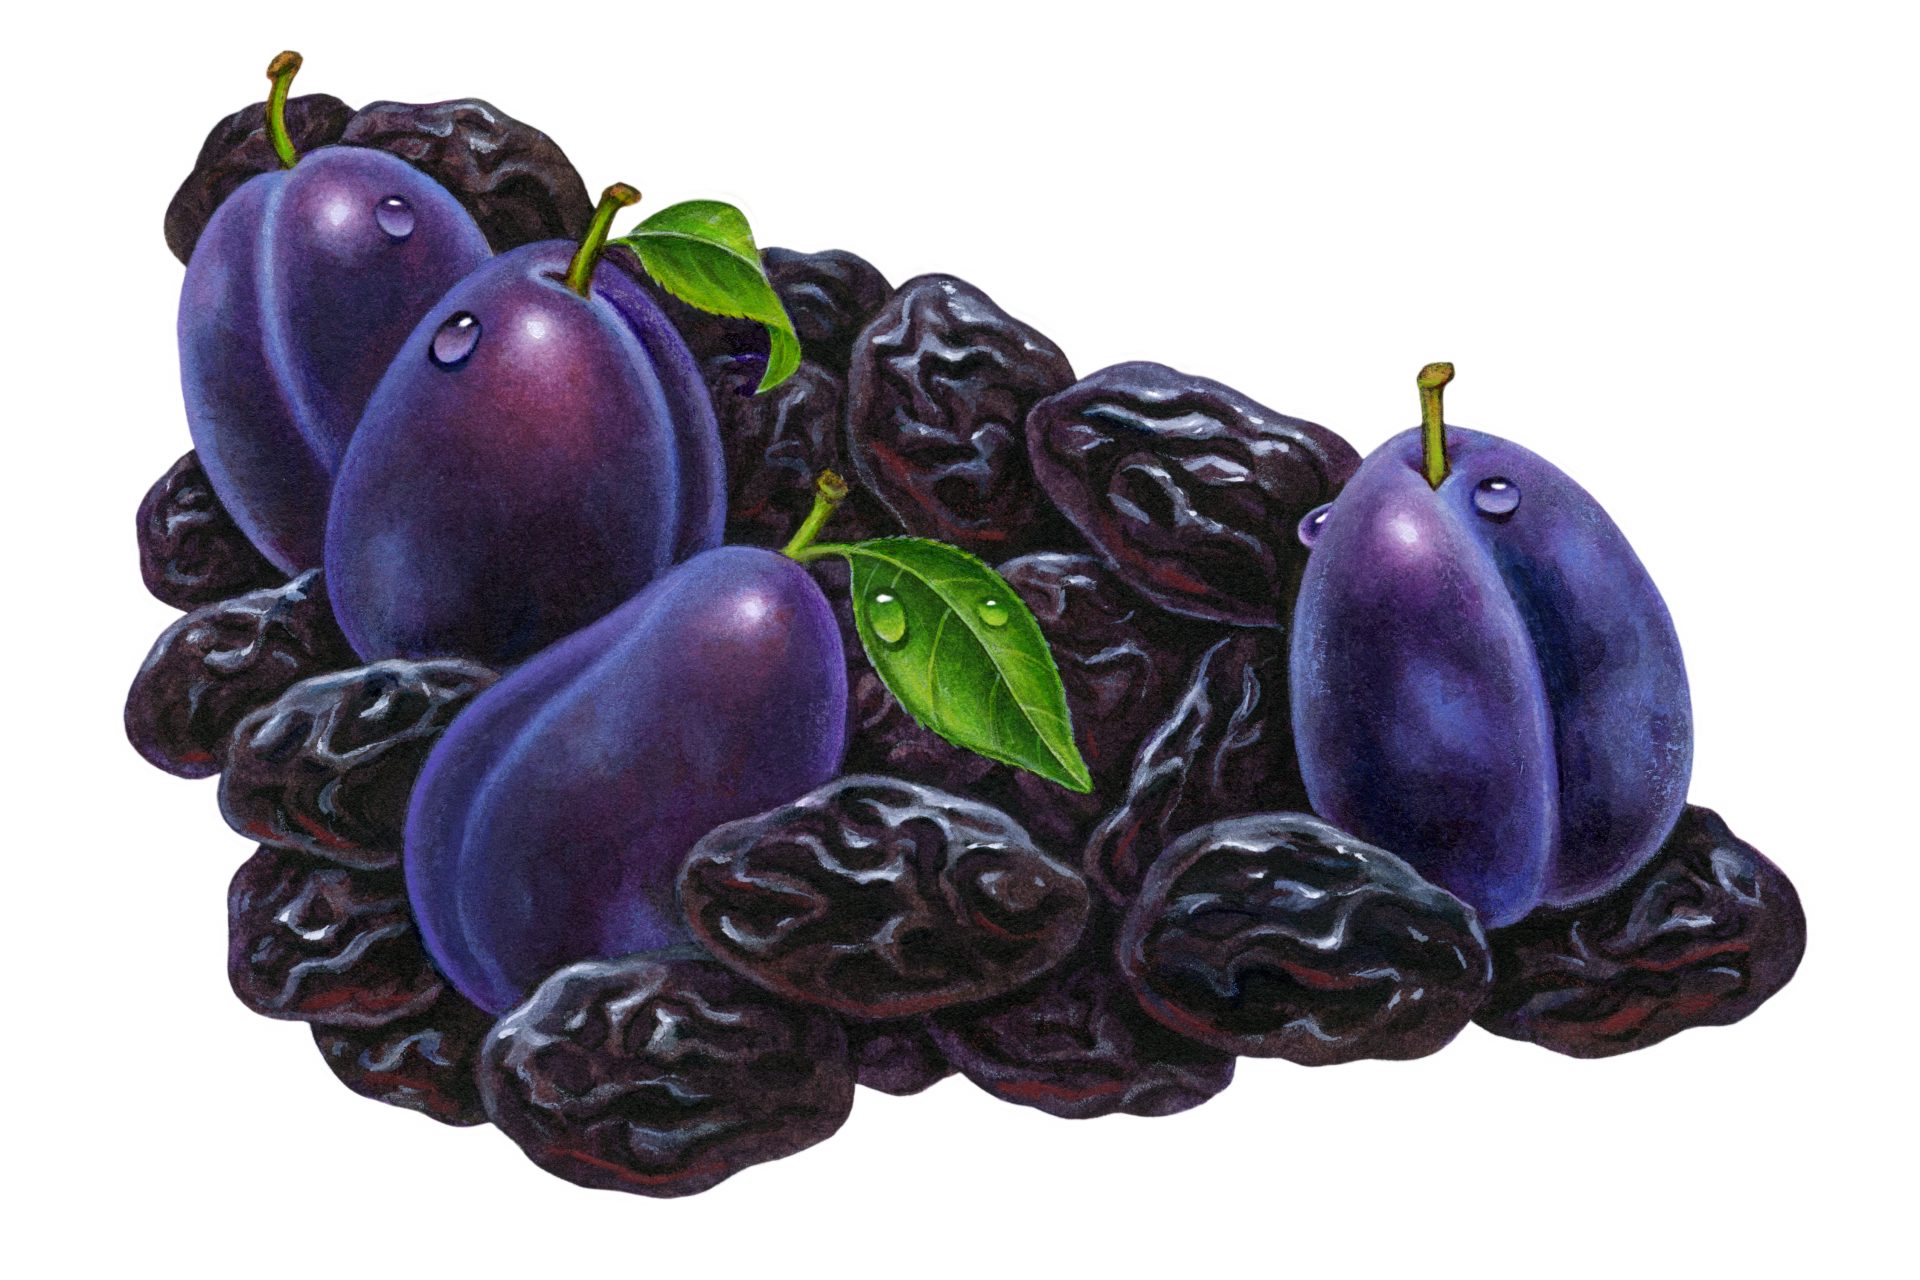 It got so bad, the United States changed the name of prunes to dried plums